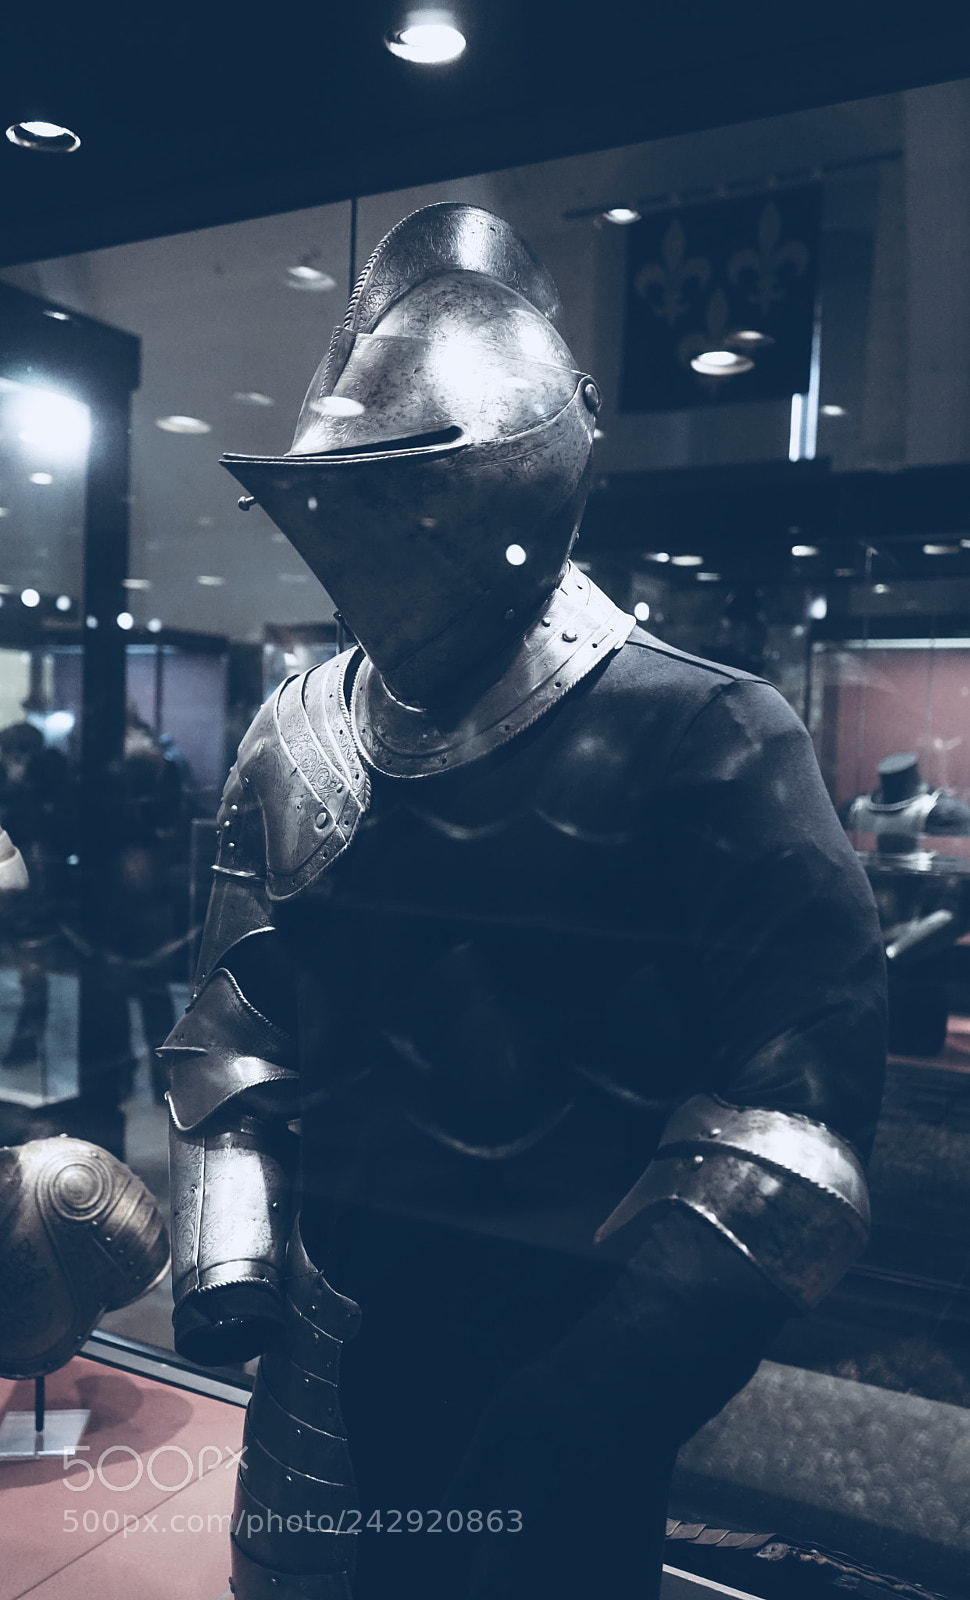 Sony a7 sample photo. This knight is cool. photography